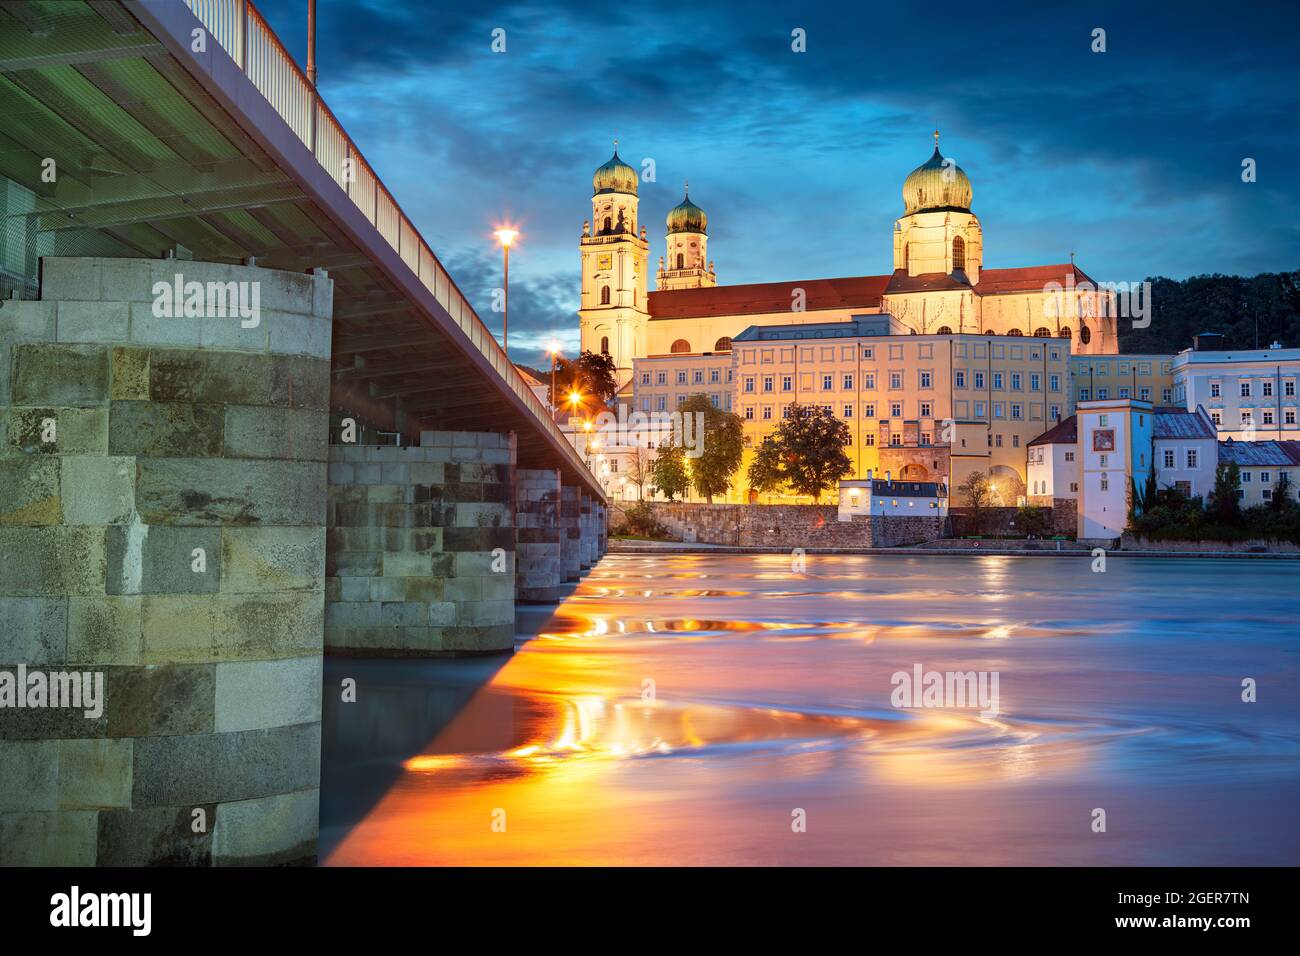 Passau, Germany. Cityscape image of Passau with the St. Stephan's Cathedral and Mary's Bridge or Mariensbrucke over Inn River at twilight blue hour. Stock Photo